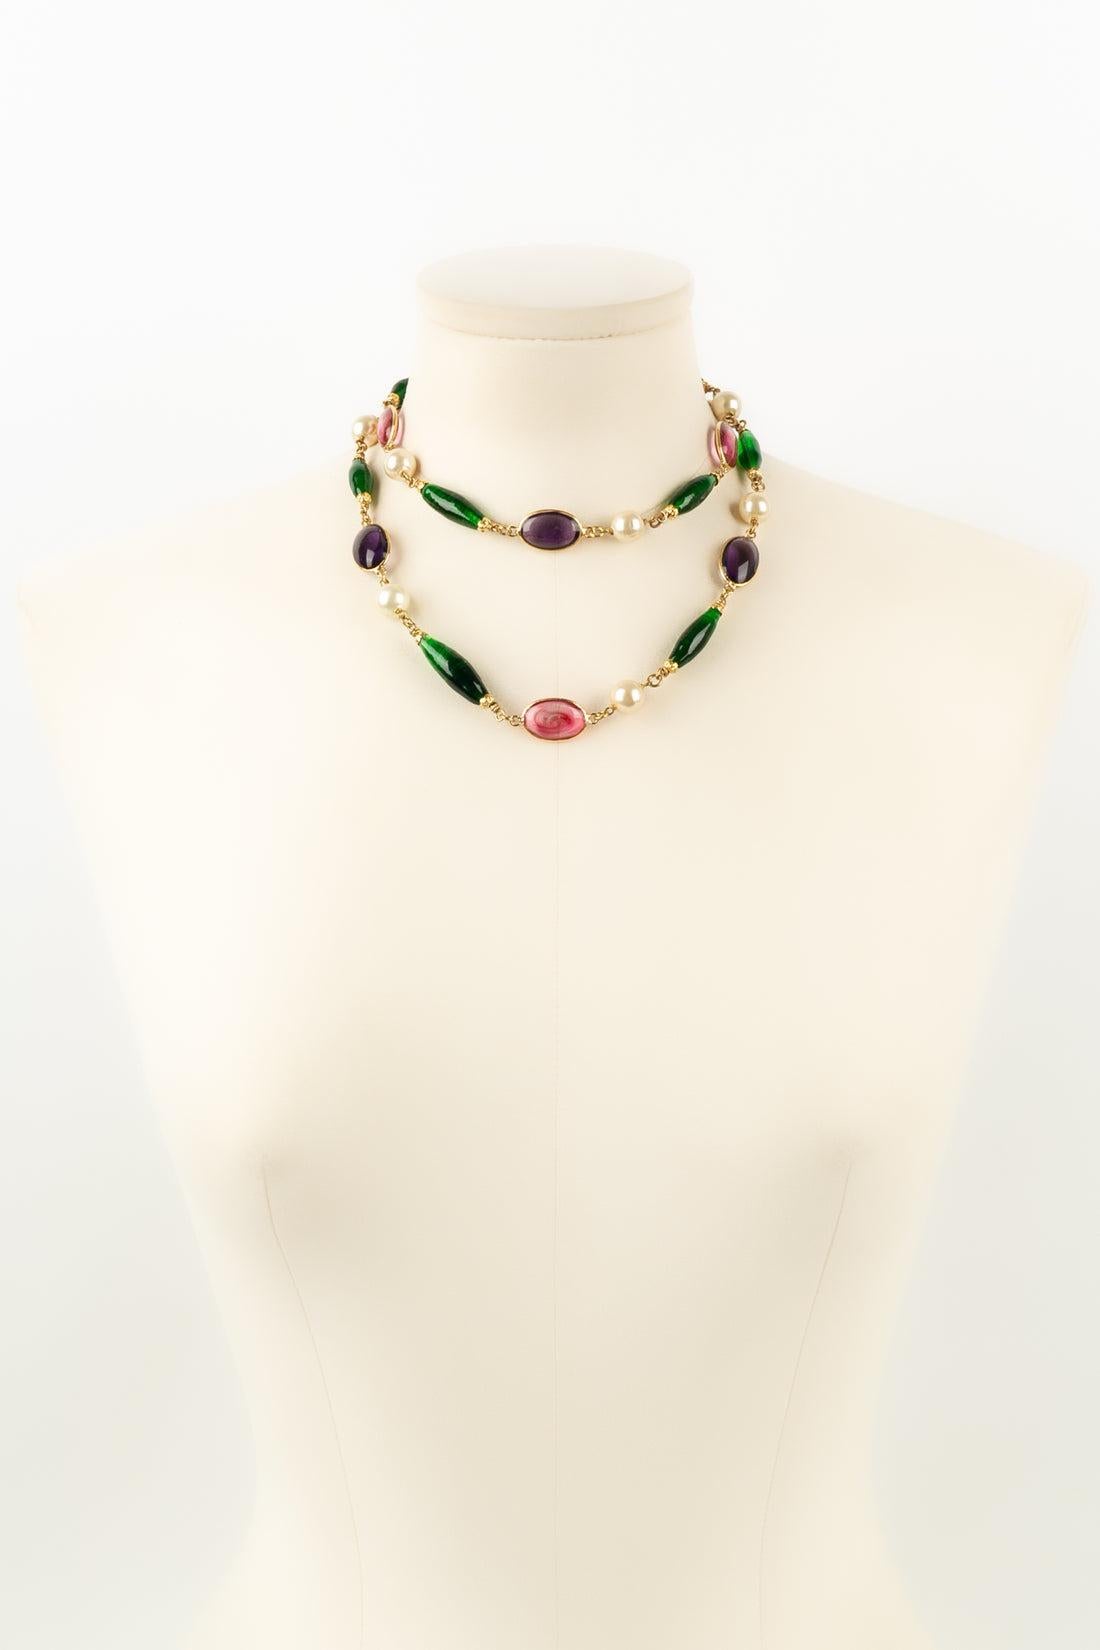 Yves Saint Laurent Necklace in Glass Paste and Pearly Beads For Sale 4